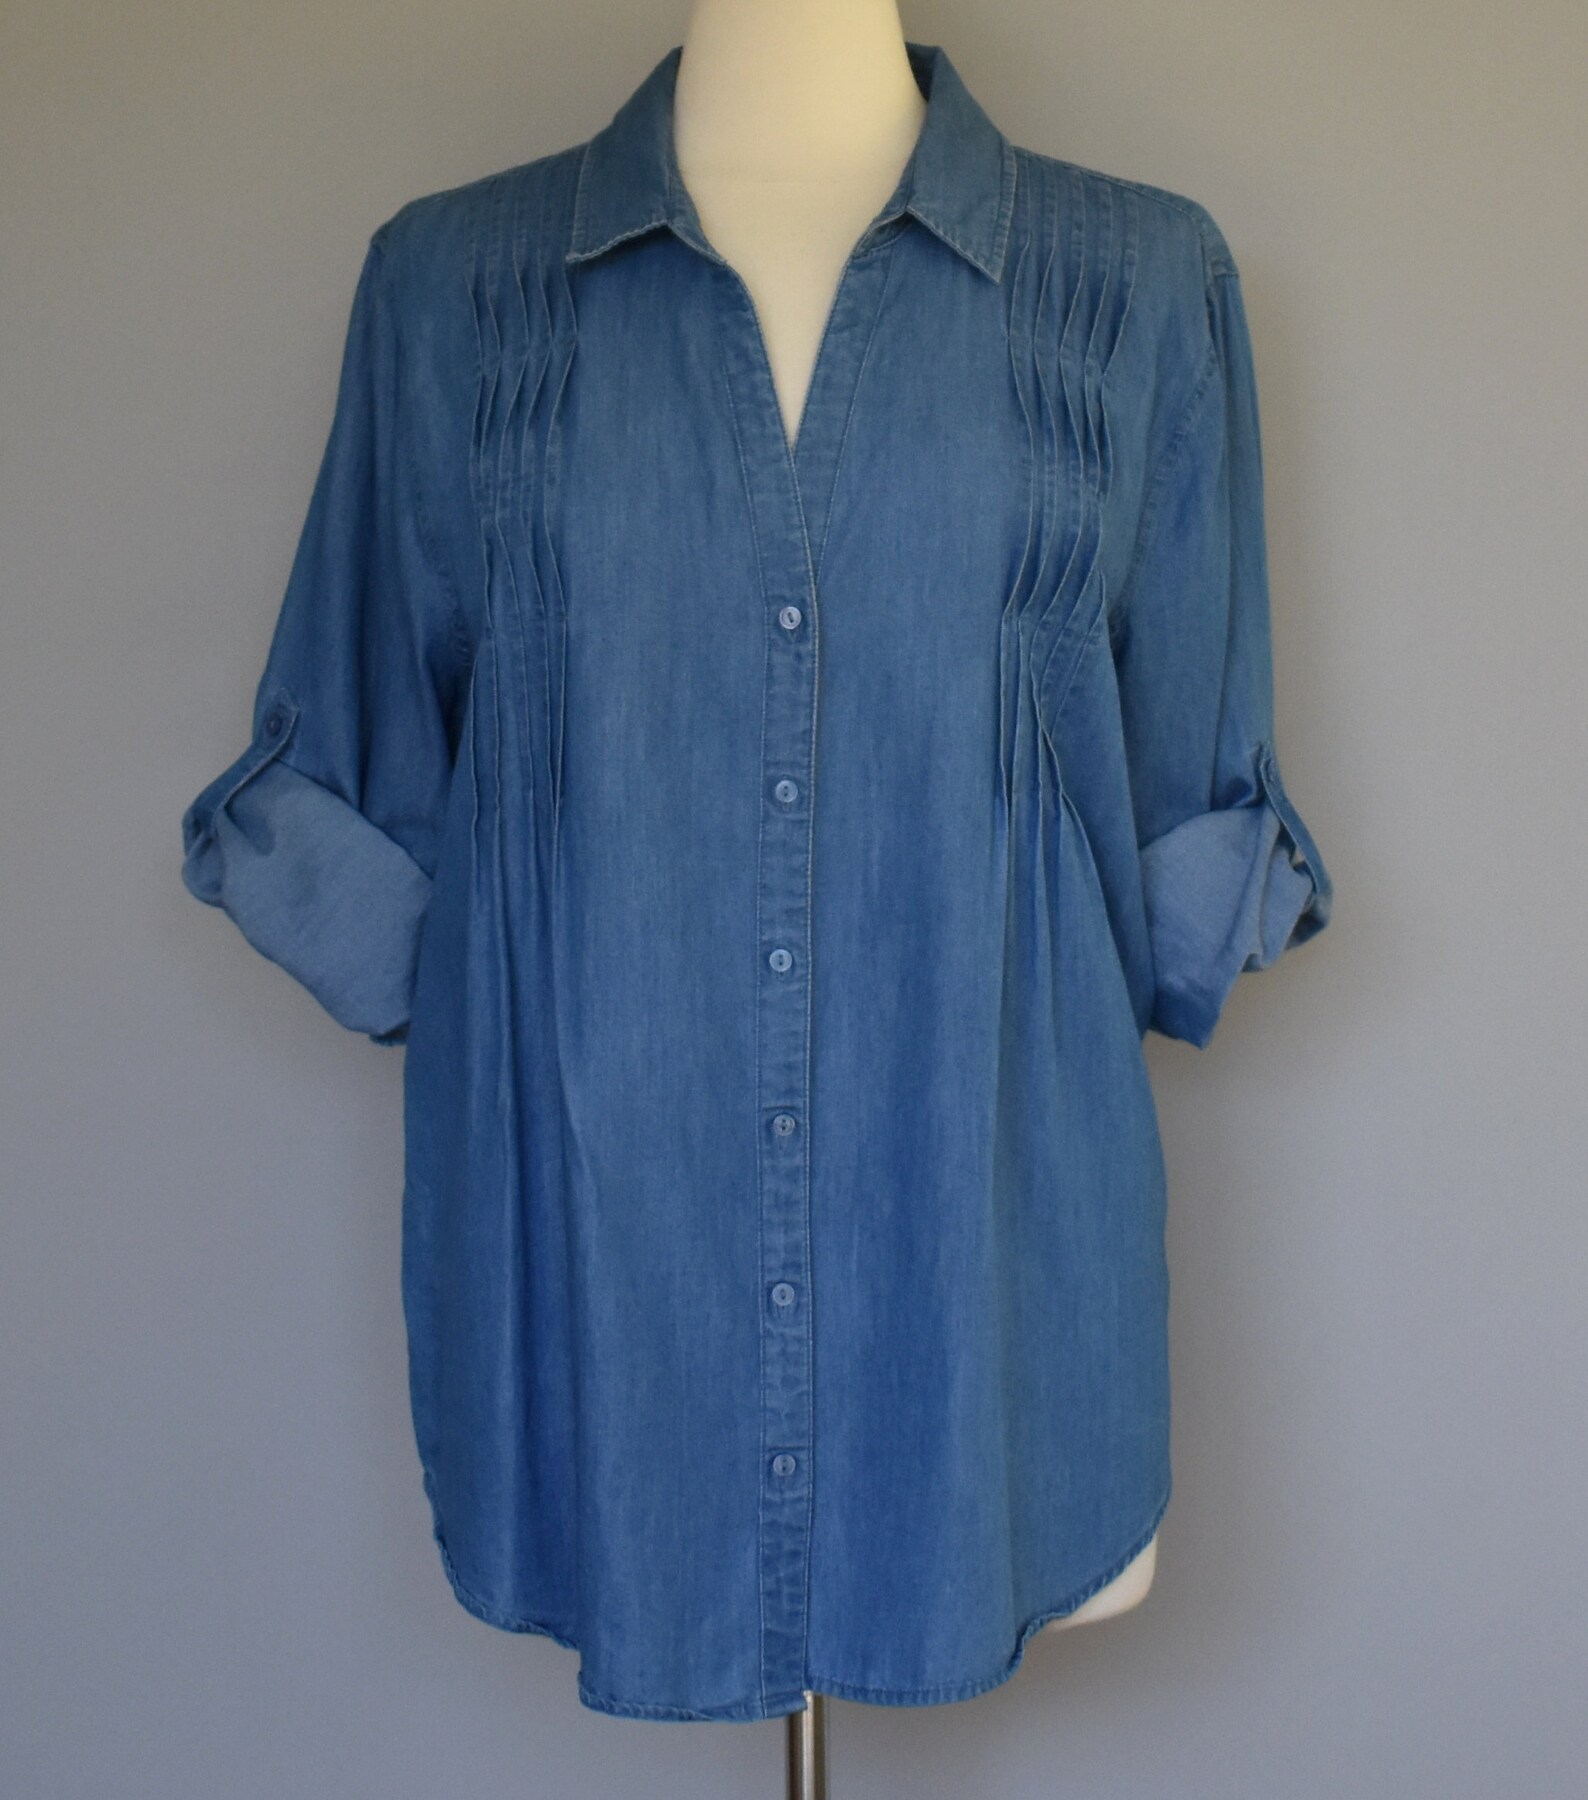 Pintucked Denim Blue Shirt Chambray Pleated Front Blouse | Etsy